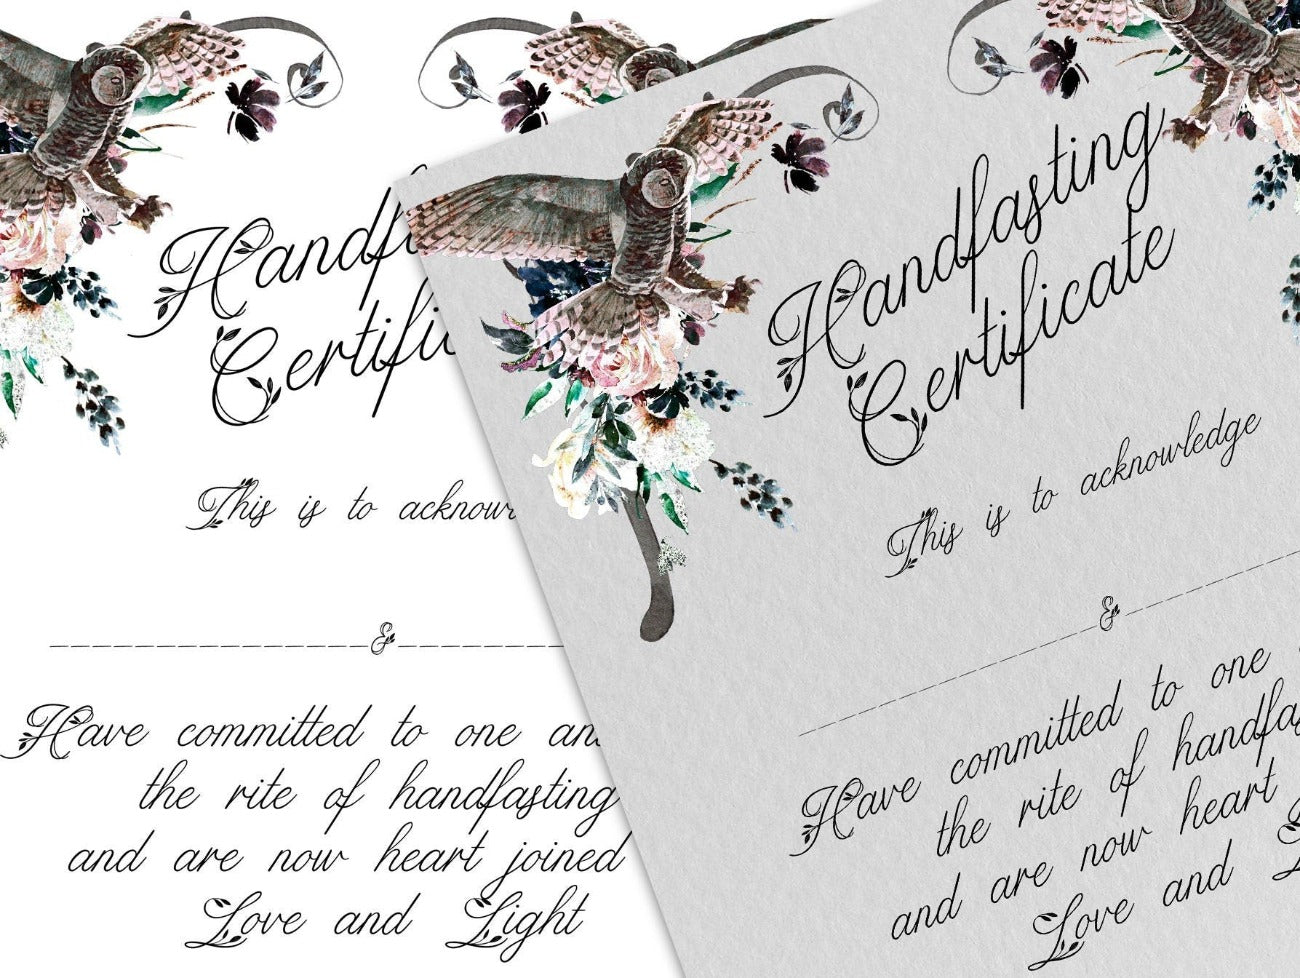 OWL HANDFASTING CERTIFICATE, Printable Wicca Pagan Wedding Certificate, Pagan Marriage Ritual, Jump the Broom, Witchcraft Cord Binding Vows - Morgana Magick Spell